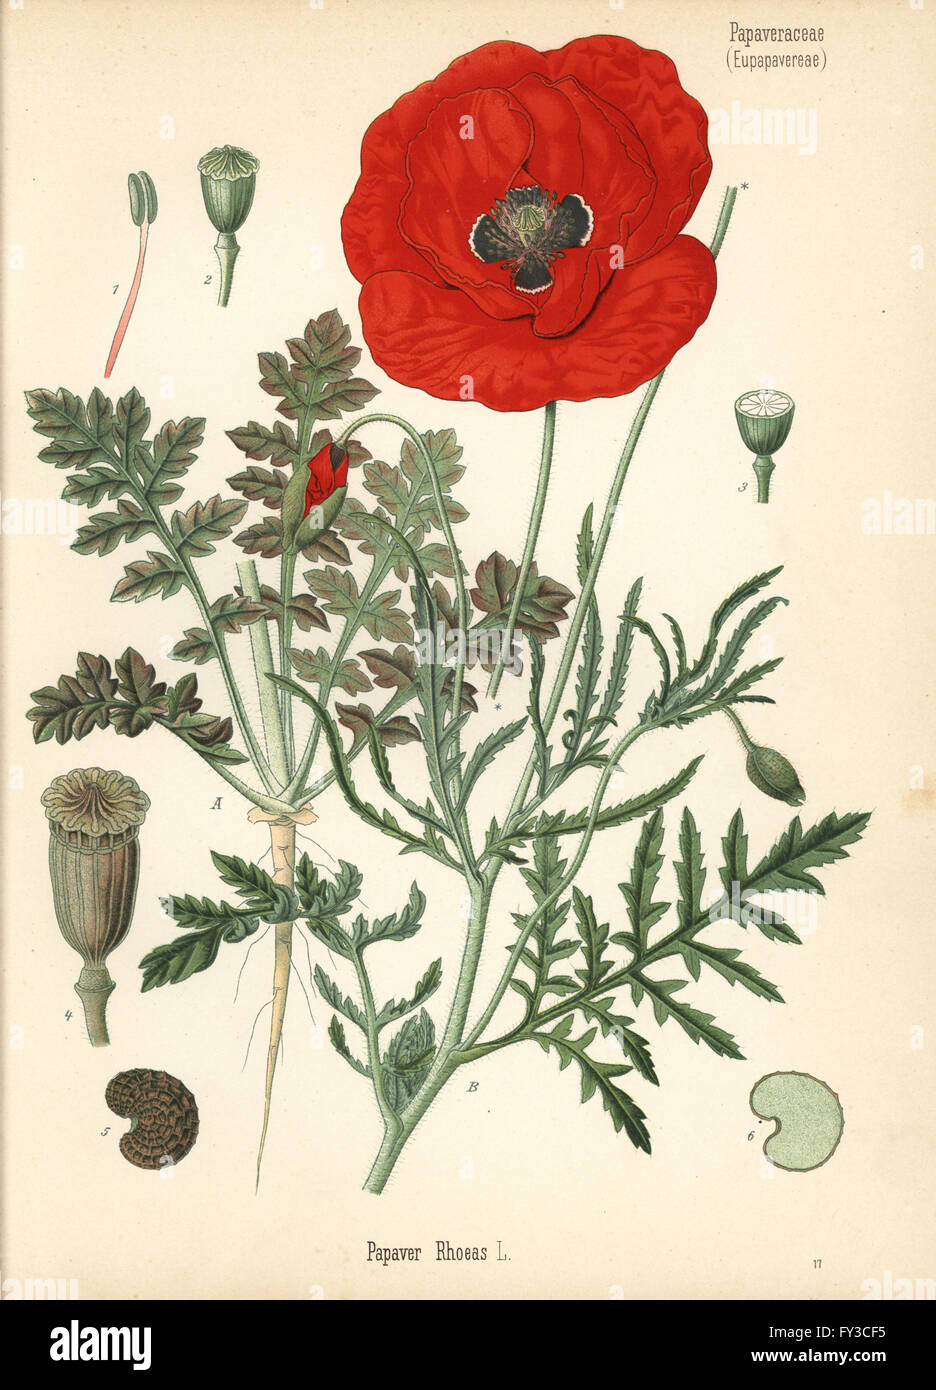 Corn poppy or field poppy, Papaver rhoeas. Chromolithograph after a botanical illustration from Hermann Adolph Koehler's Medicinal Plants, edited by Gustav Pabst, Koehler, Germany, 1887. Stock Photo